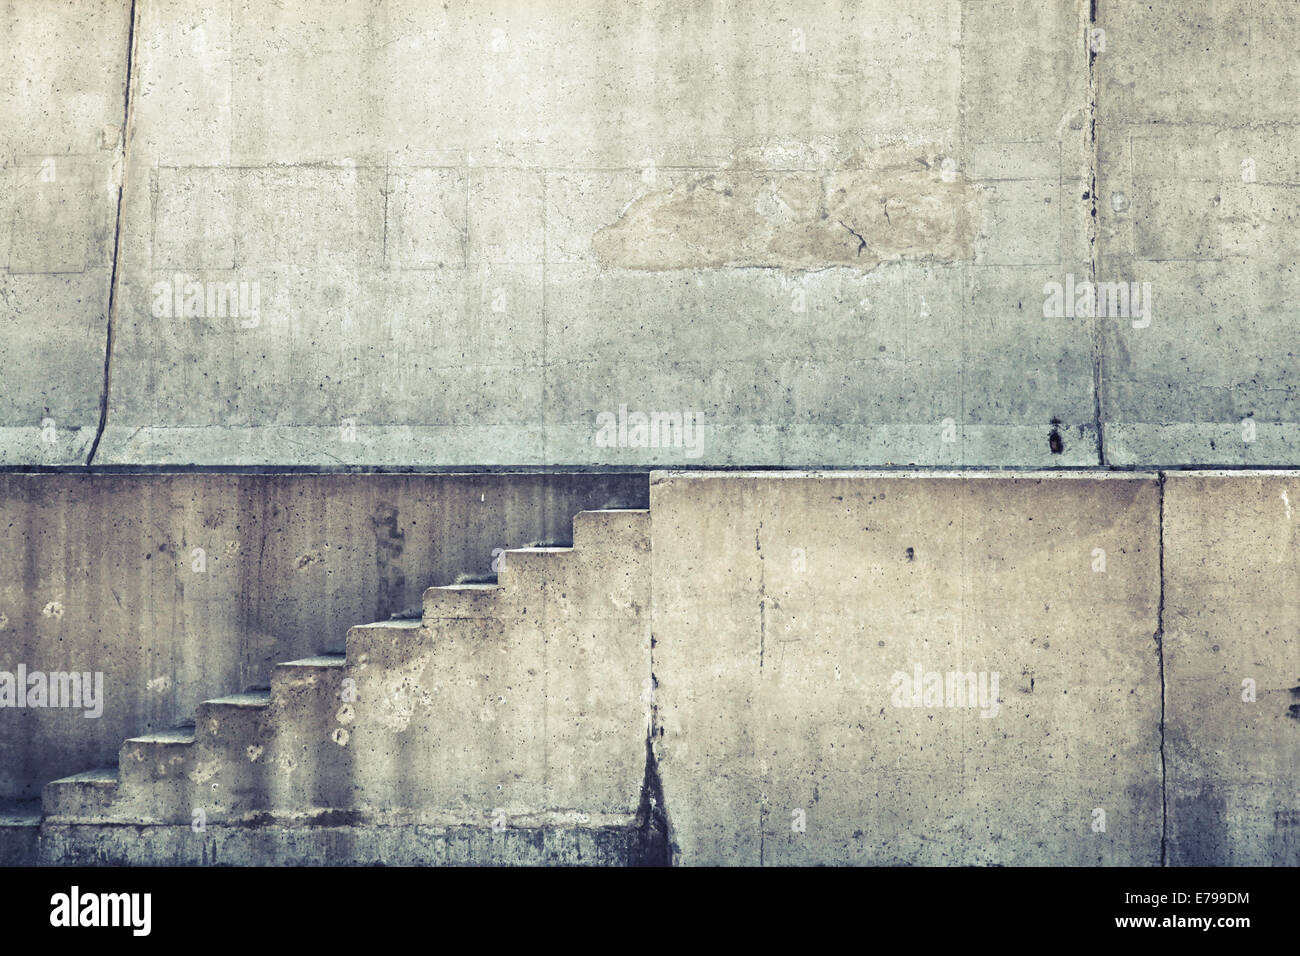 Concrete interior with stairway on the wall, vintage toned Stock Photo